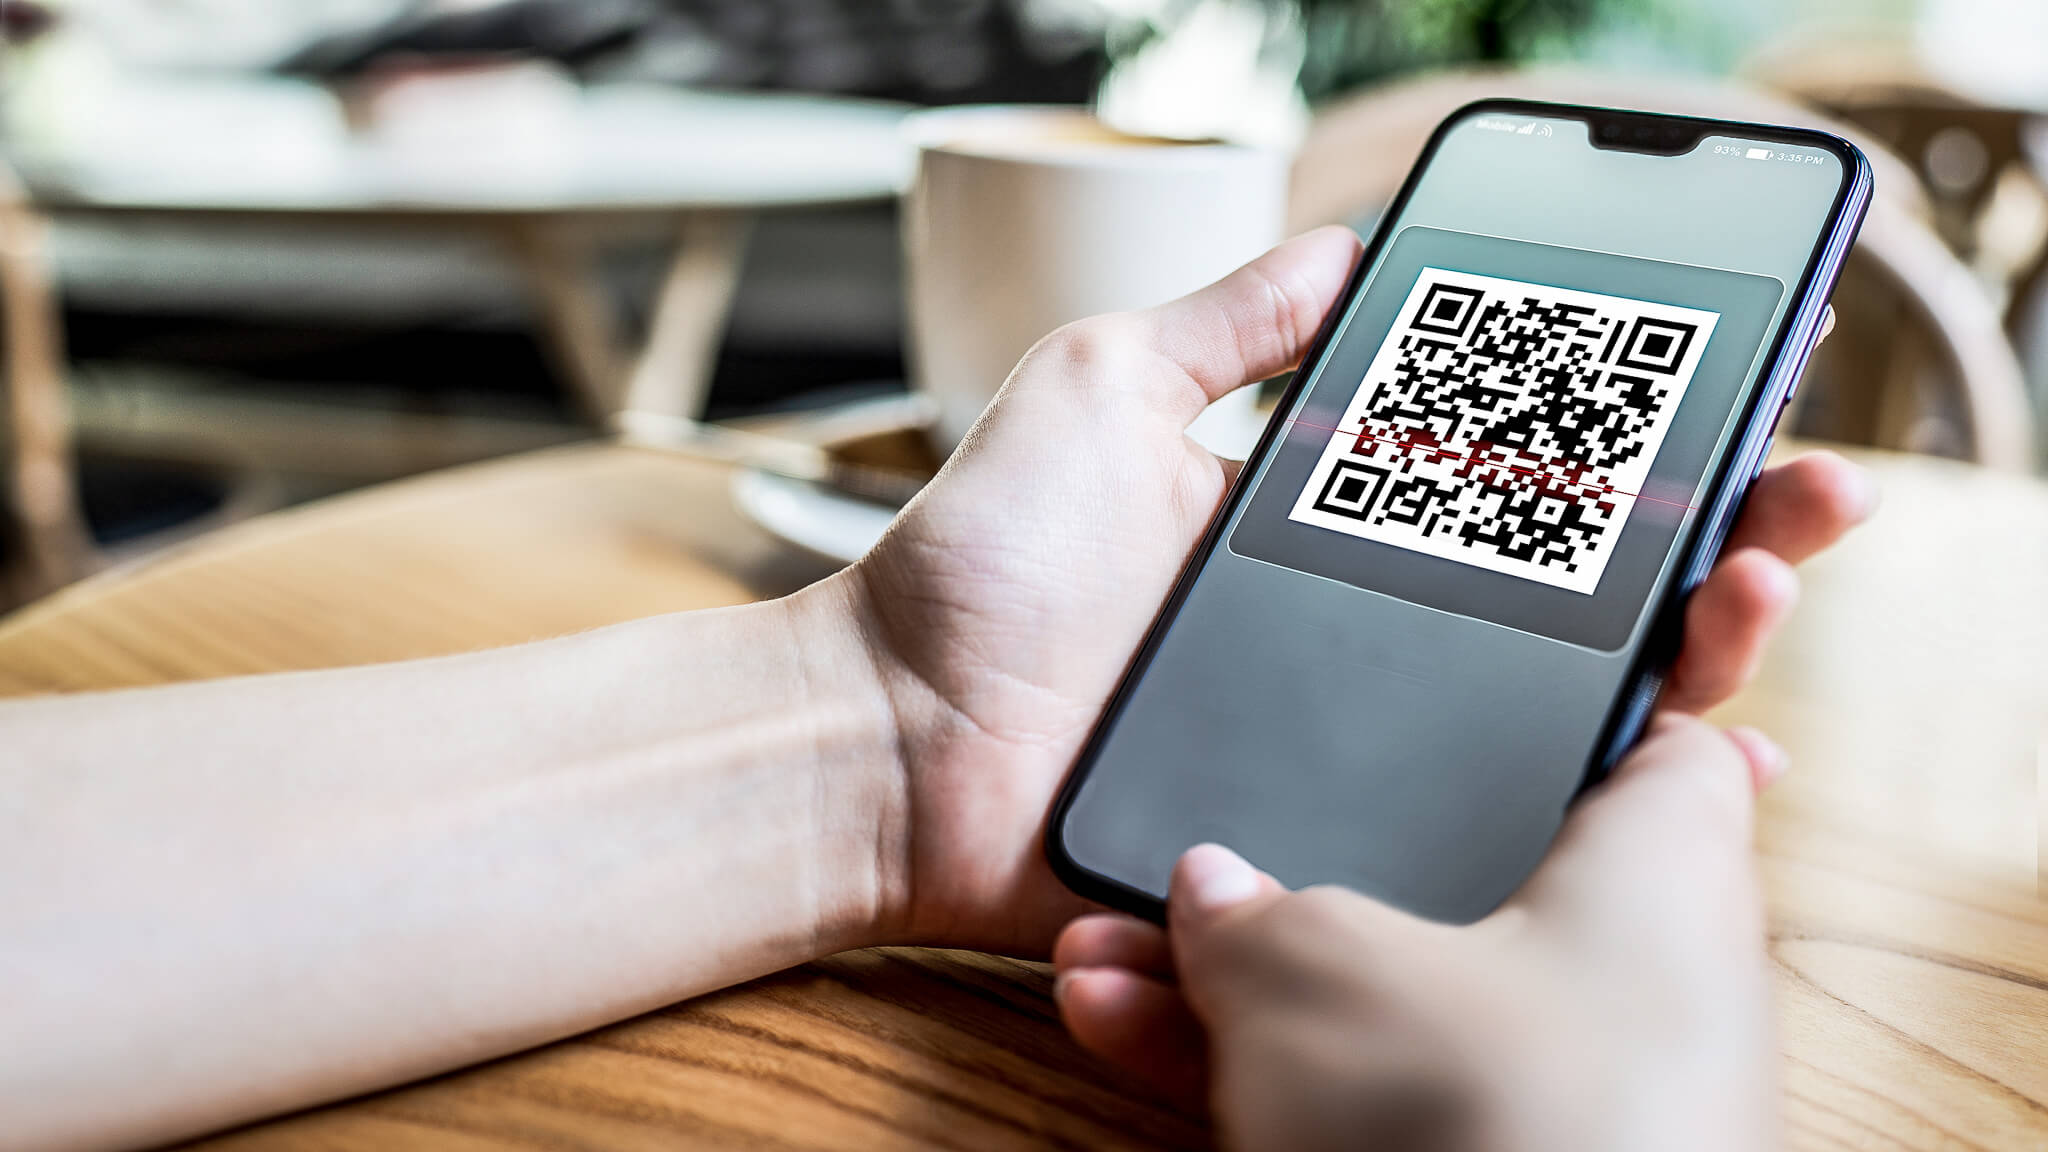 QR codes (important building block of IoT) is scanned in the restaurant.